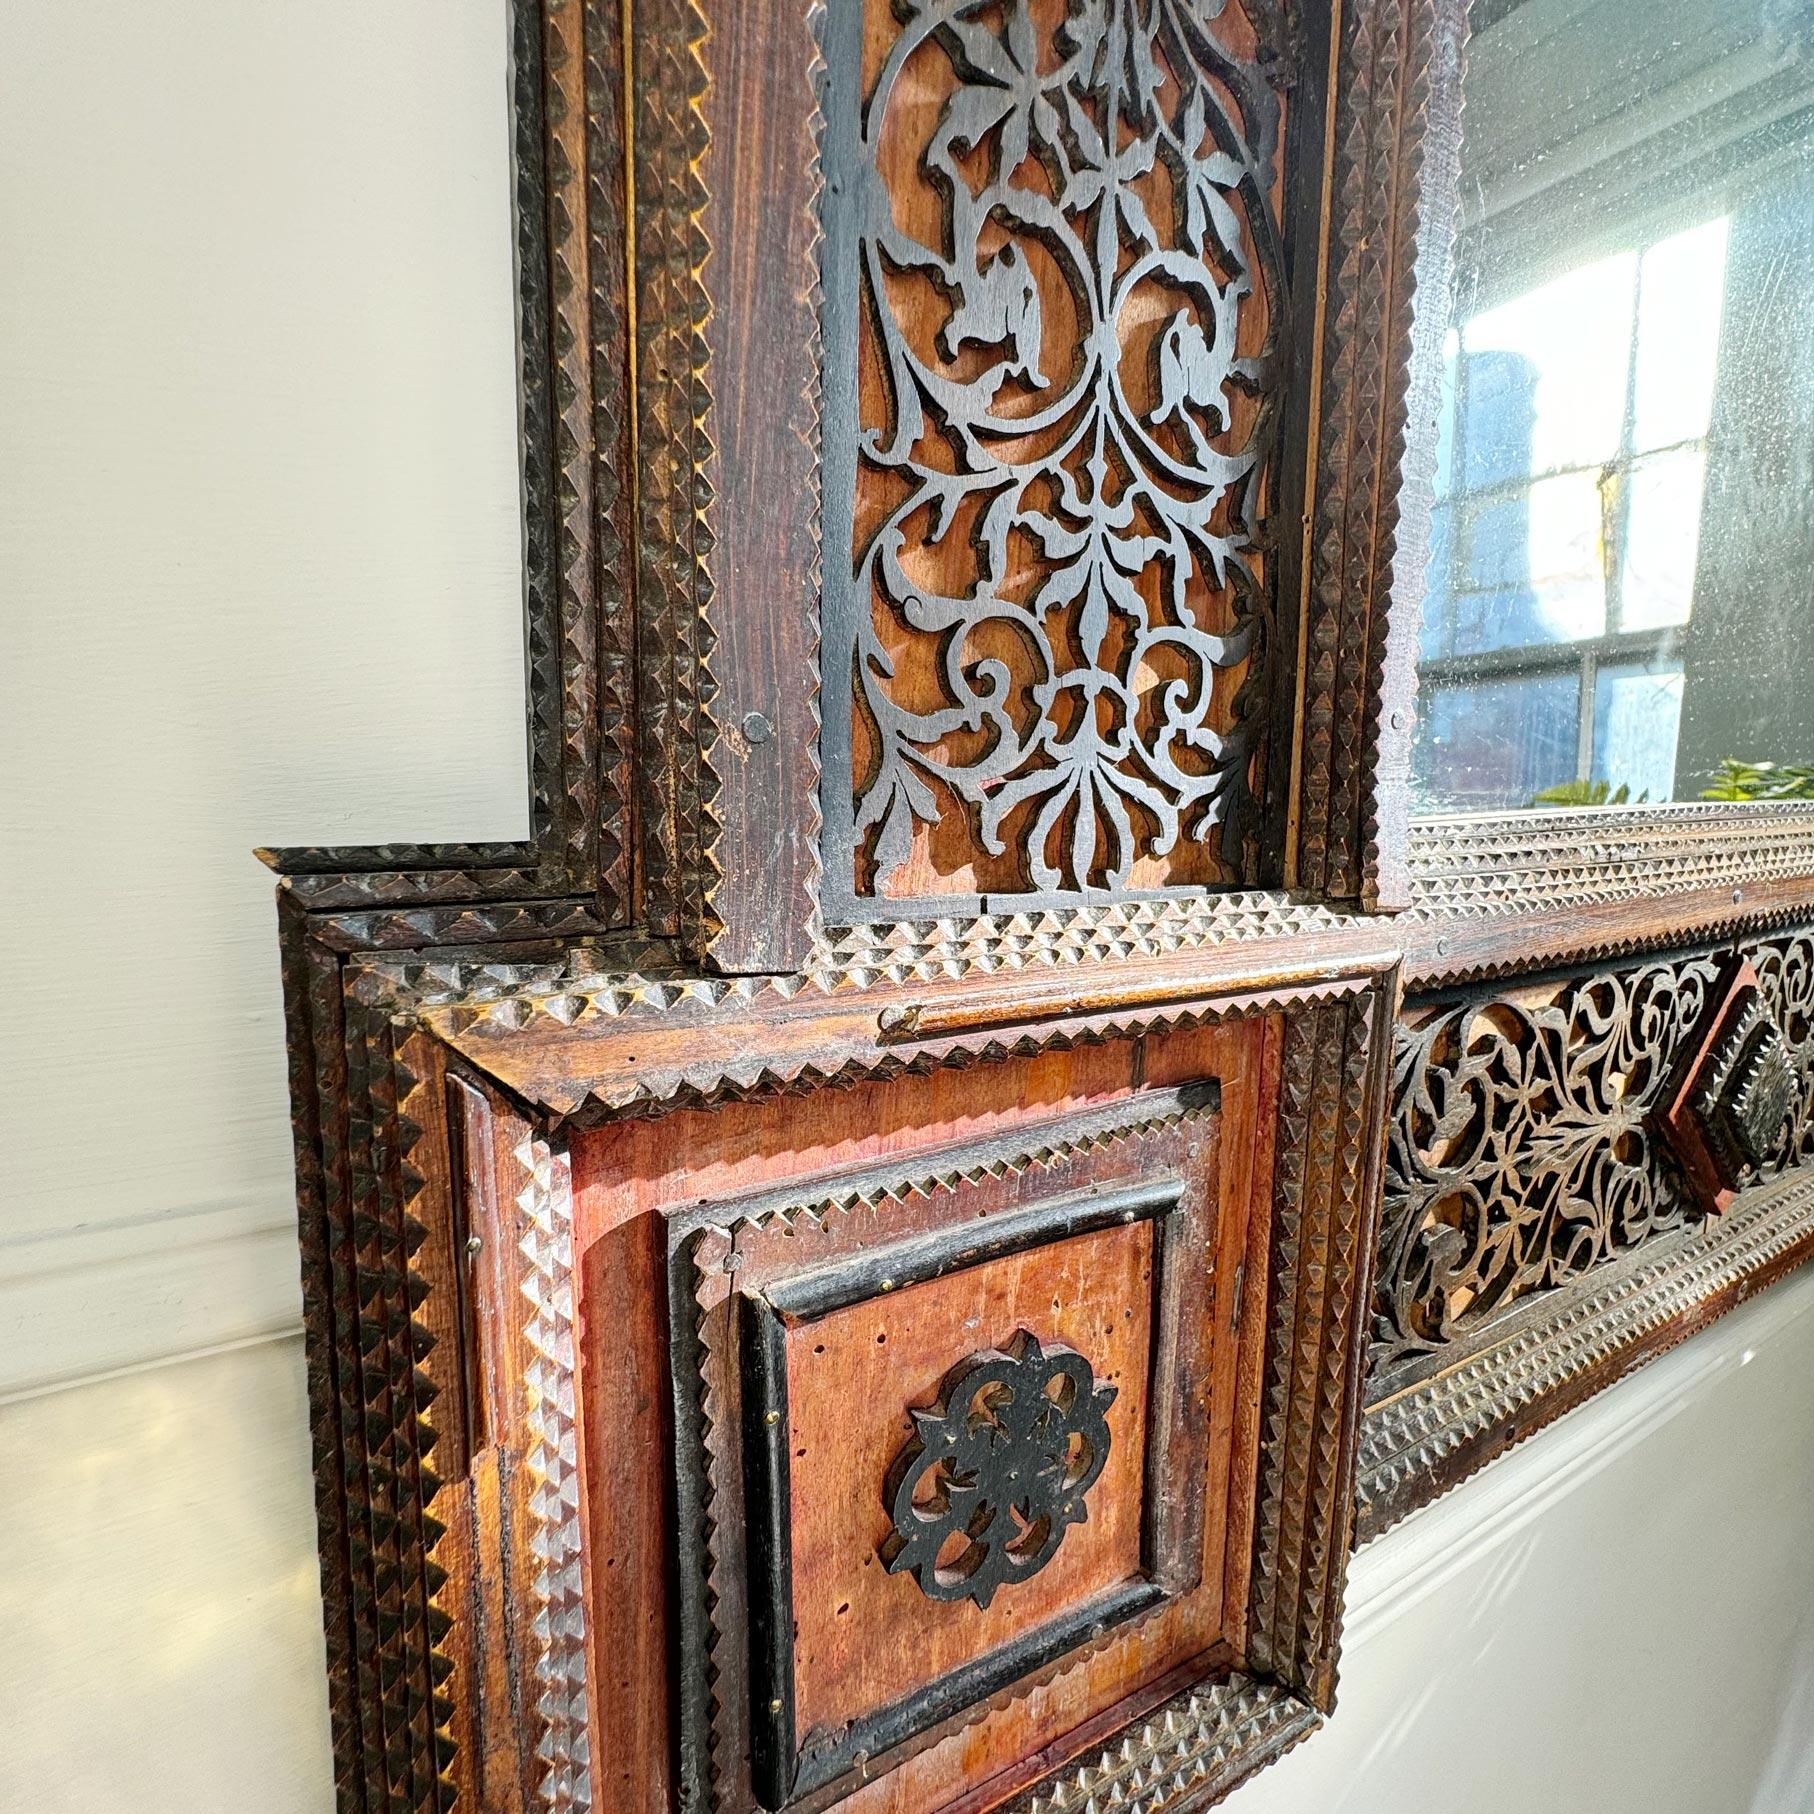 19th Century German Crested Tramp Art Mirror with Fretwork Detailing For Sale 3